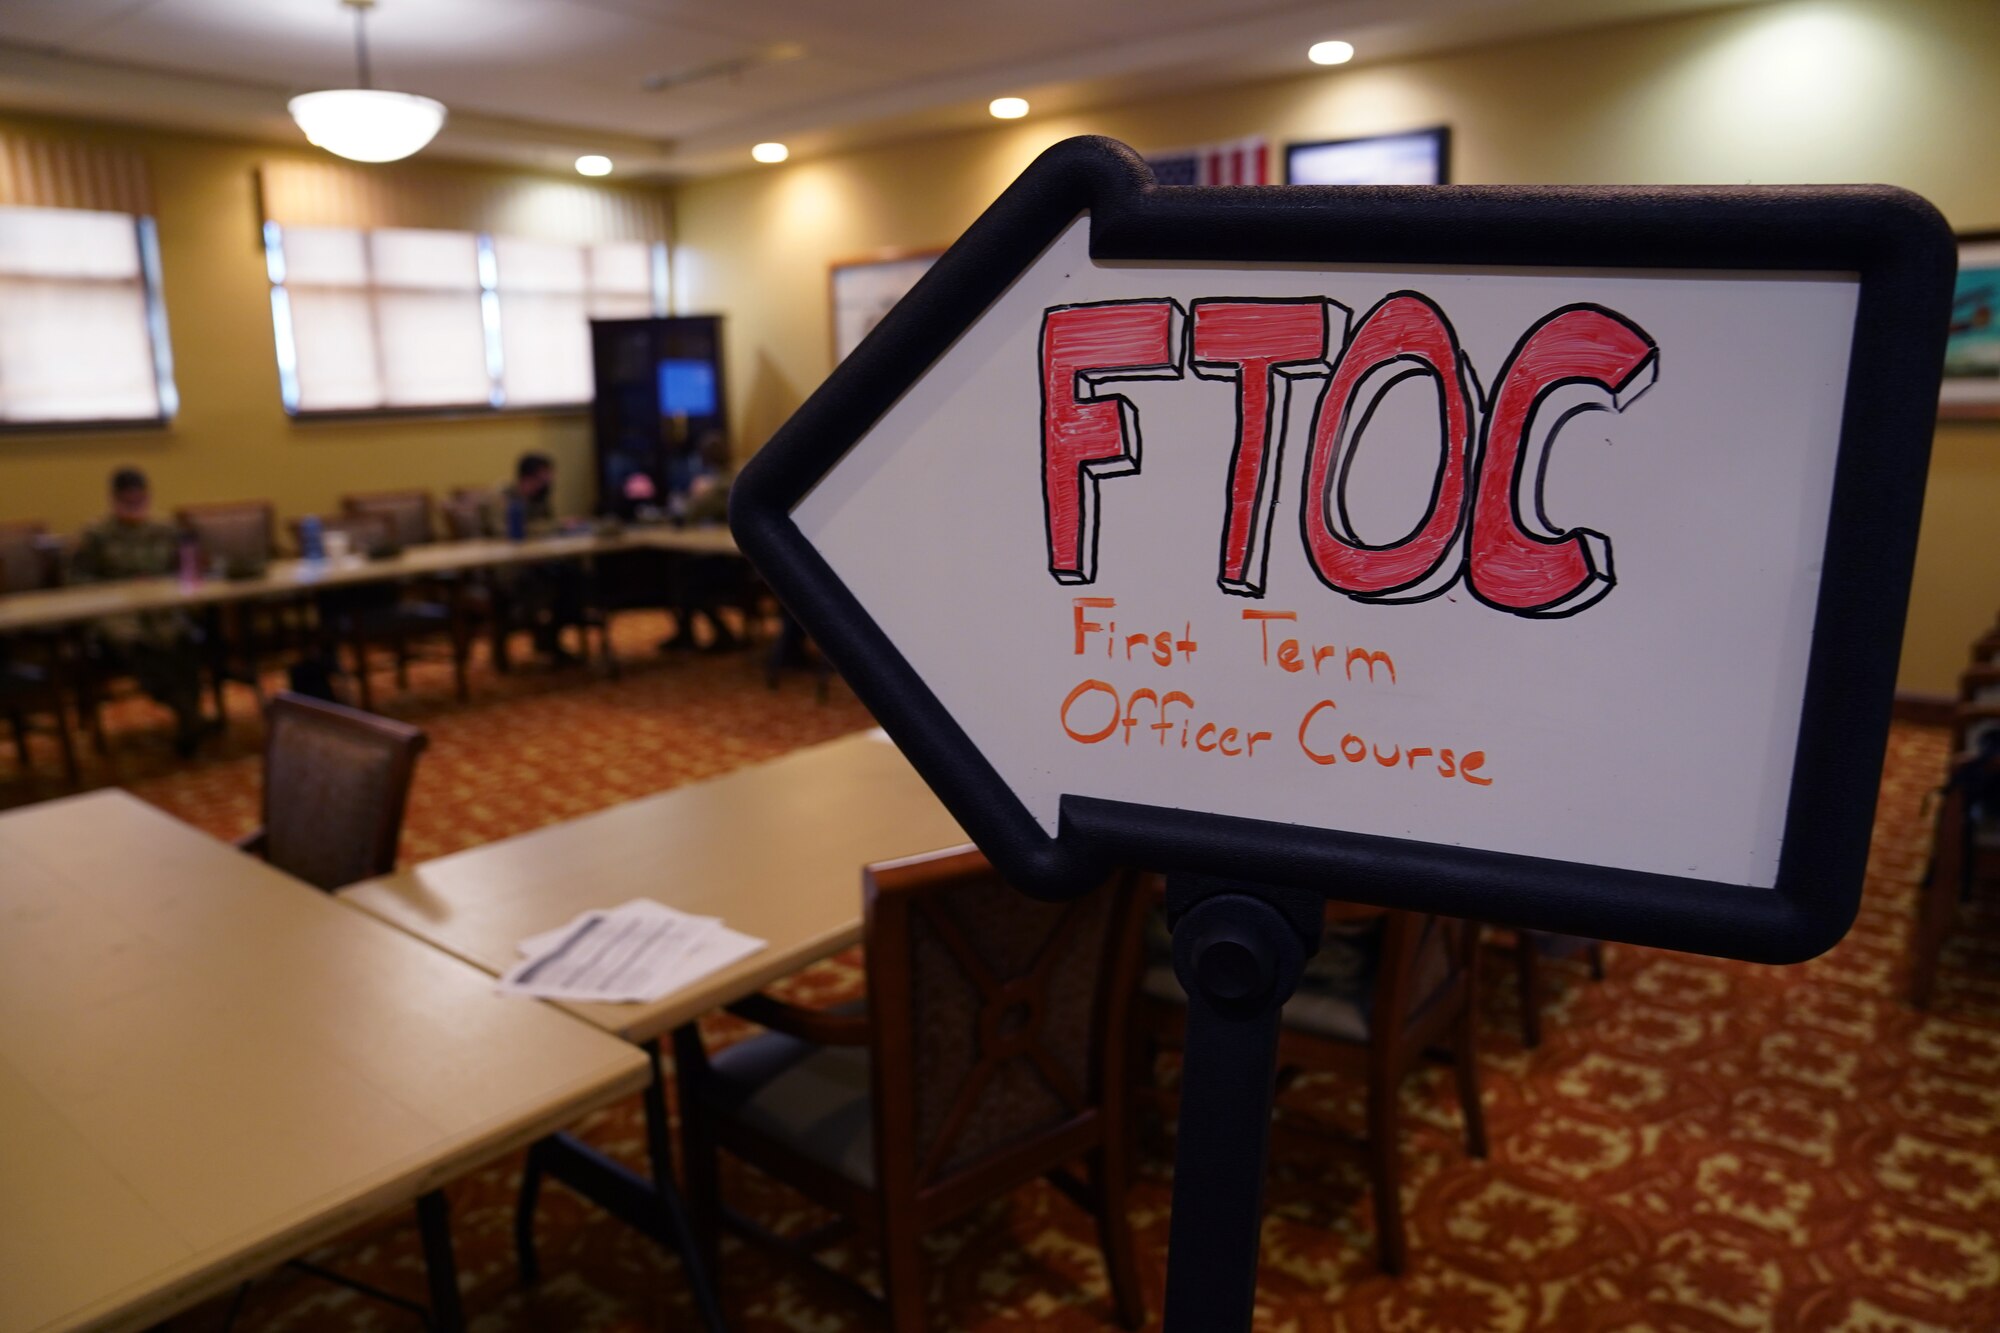 An First Term Officers Course entrance sign is displayed before the FTOC classroom in the Bay Breeze Event Center at Keesler Air Force Base, Mississippi, January 19, 2022. The FTOC was created to develop the job and leadership skillsets of first-term officers. (U.S. Air Force photo by Senior Airman Seth Haddix)